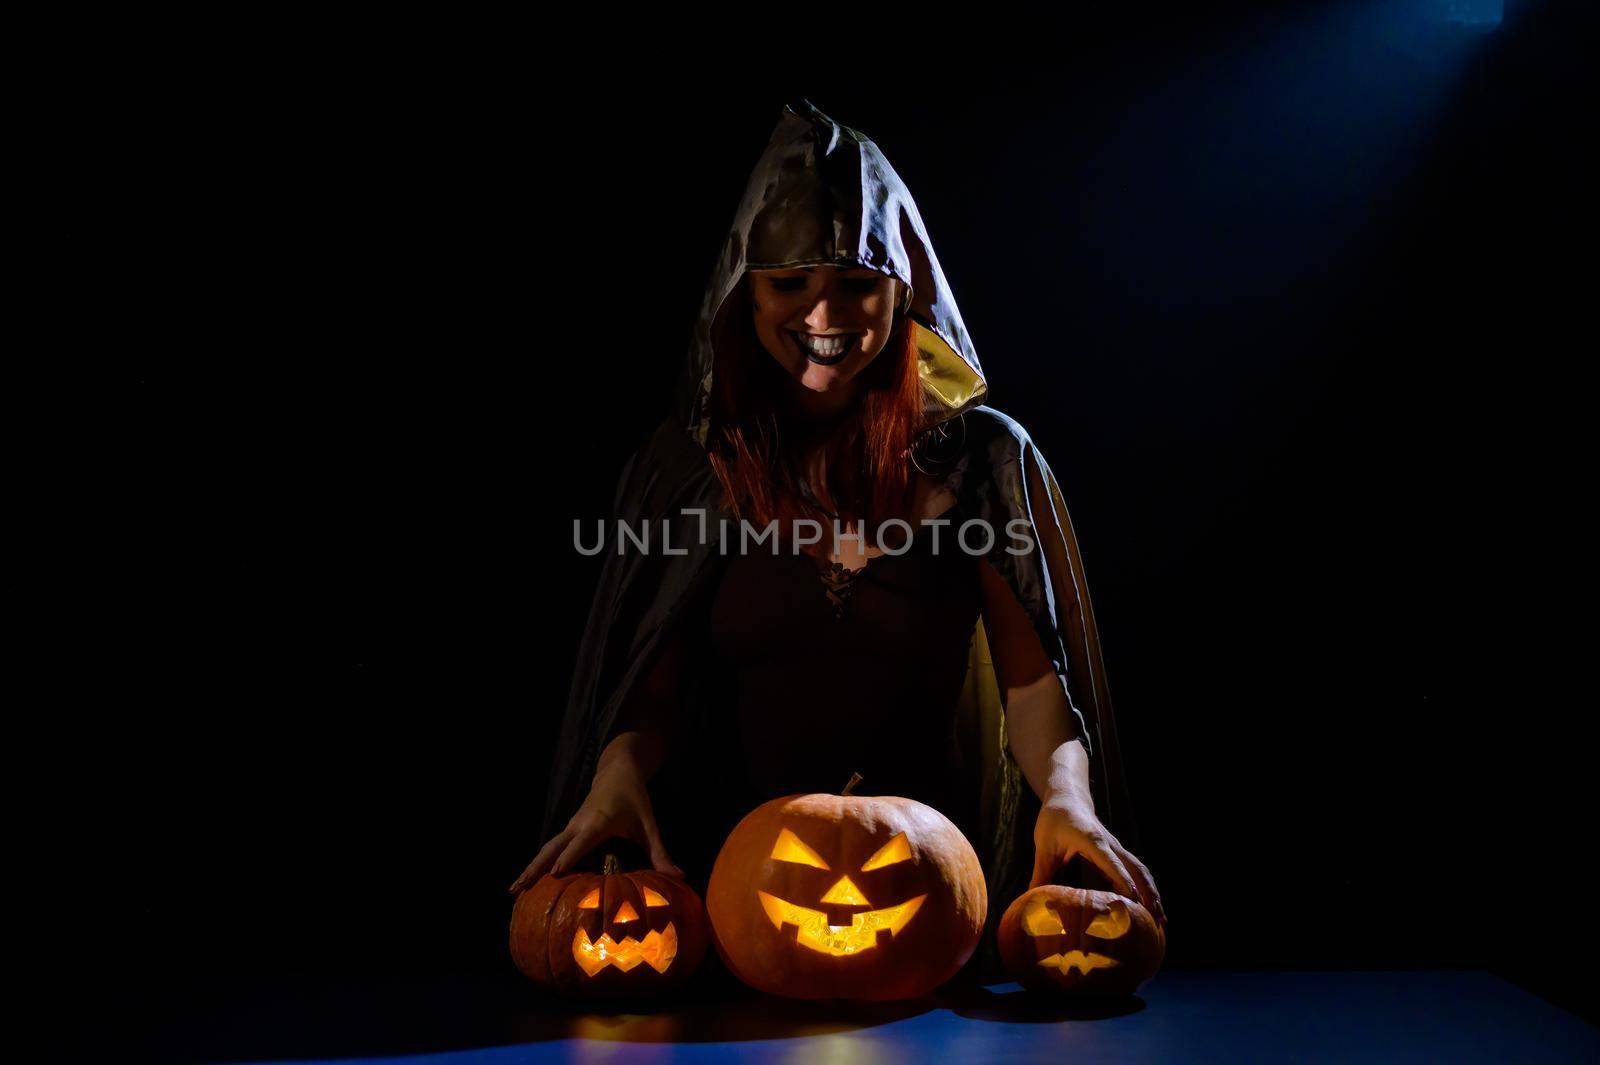 A creepy sorceress in a cloak casts a spell on pumpkins for Halloween by mrwed54